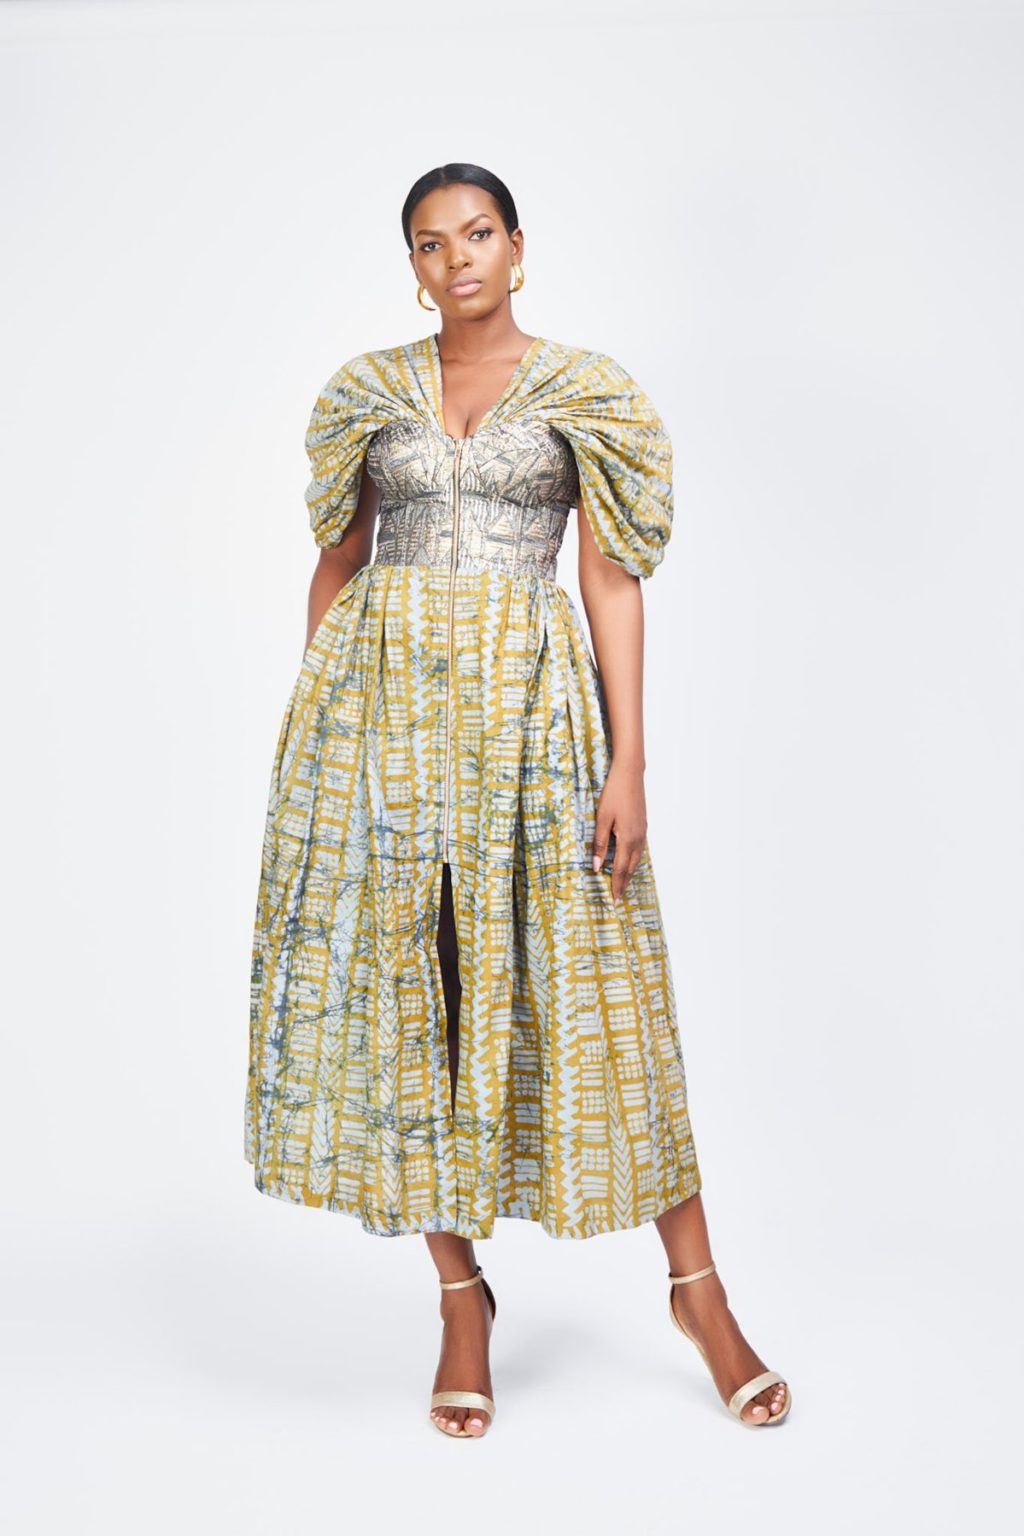 Must See Looks From Christie Brown's Fall/Winter 2020 Collection